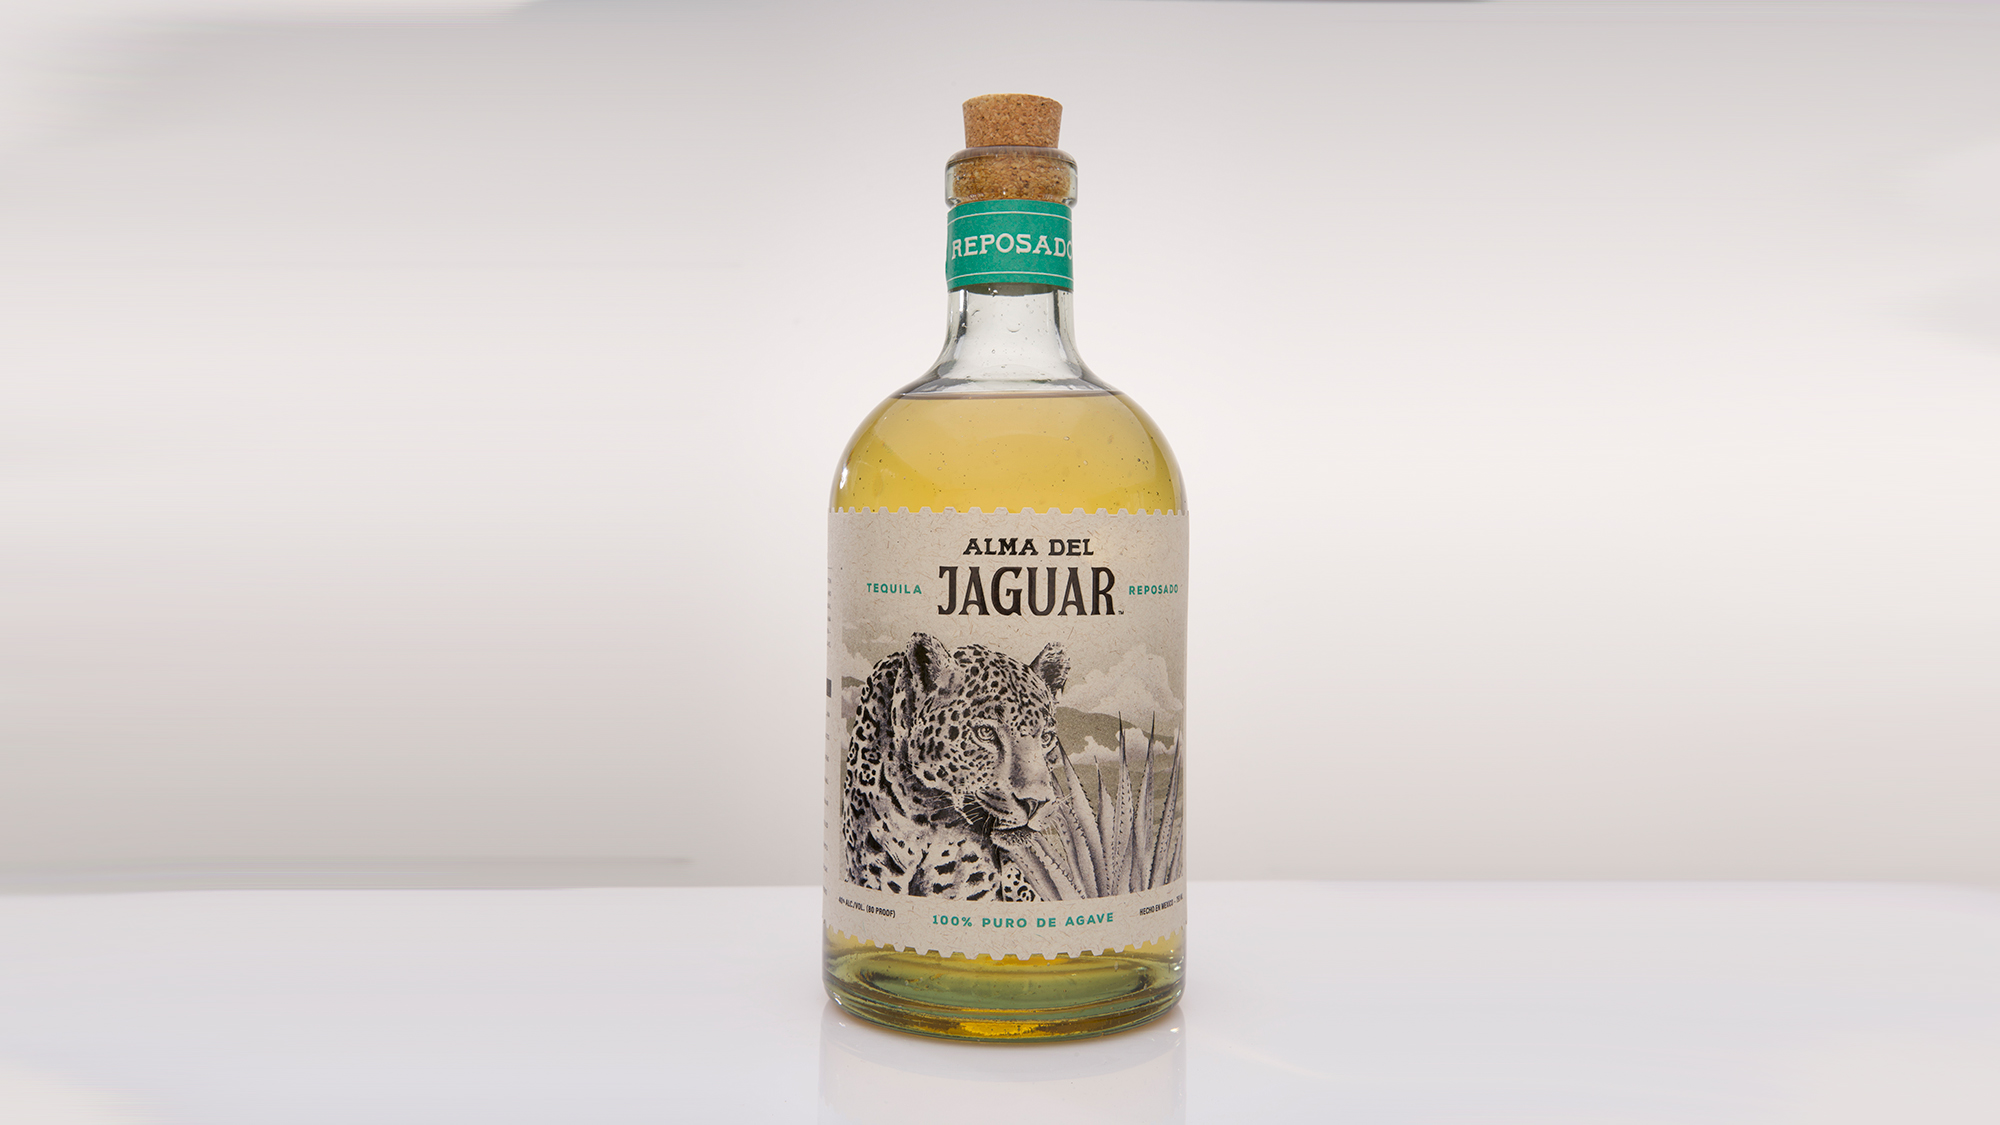 Alma Del Jaguar Tequila Launches Reposado Crafted To Support Jaguar Conservation